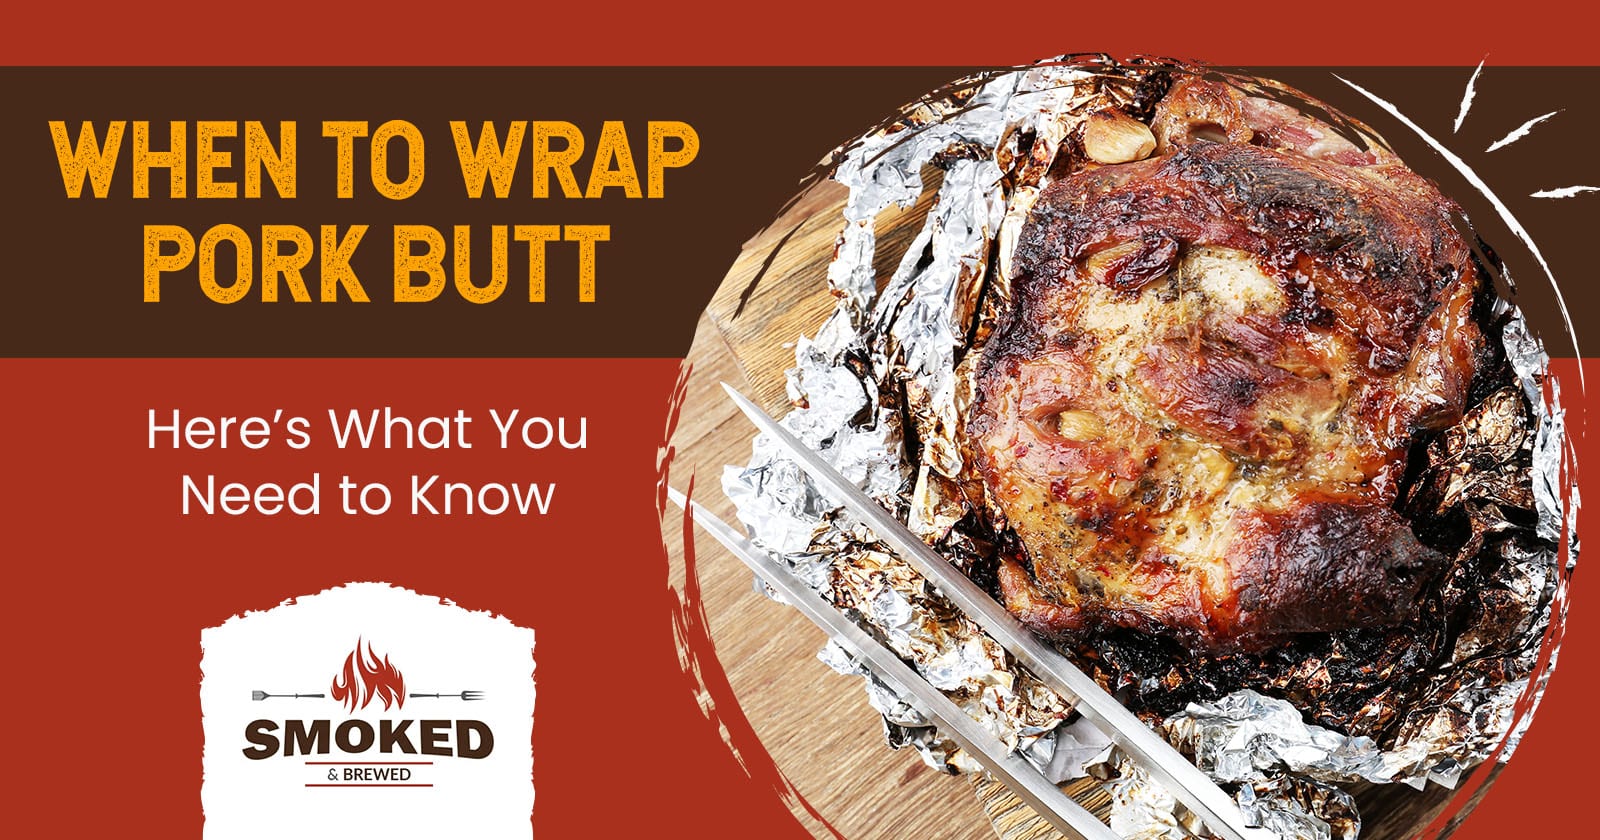 When to Wrap Pork Butt – Here’s What You Need to Know